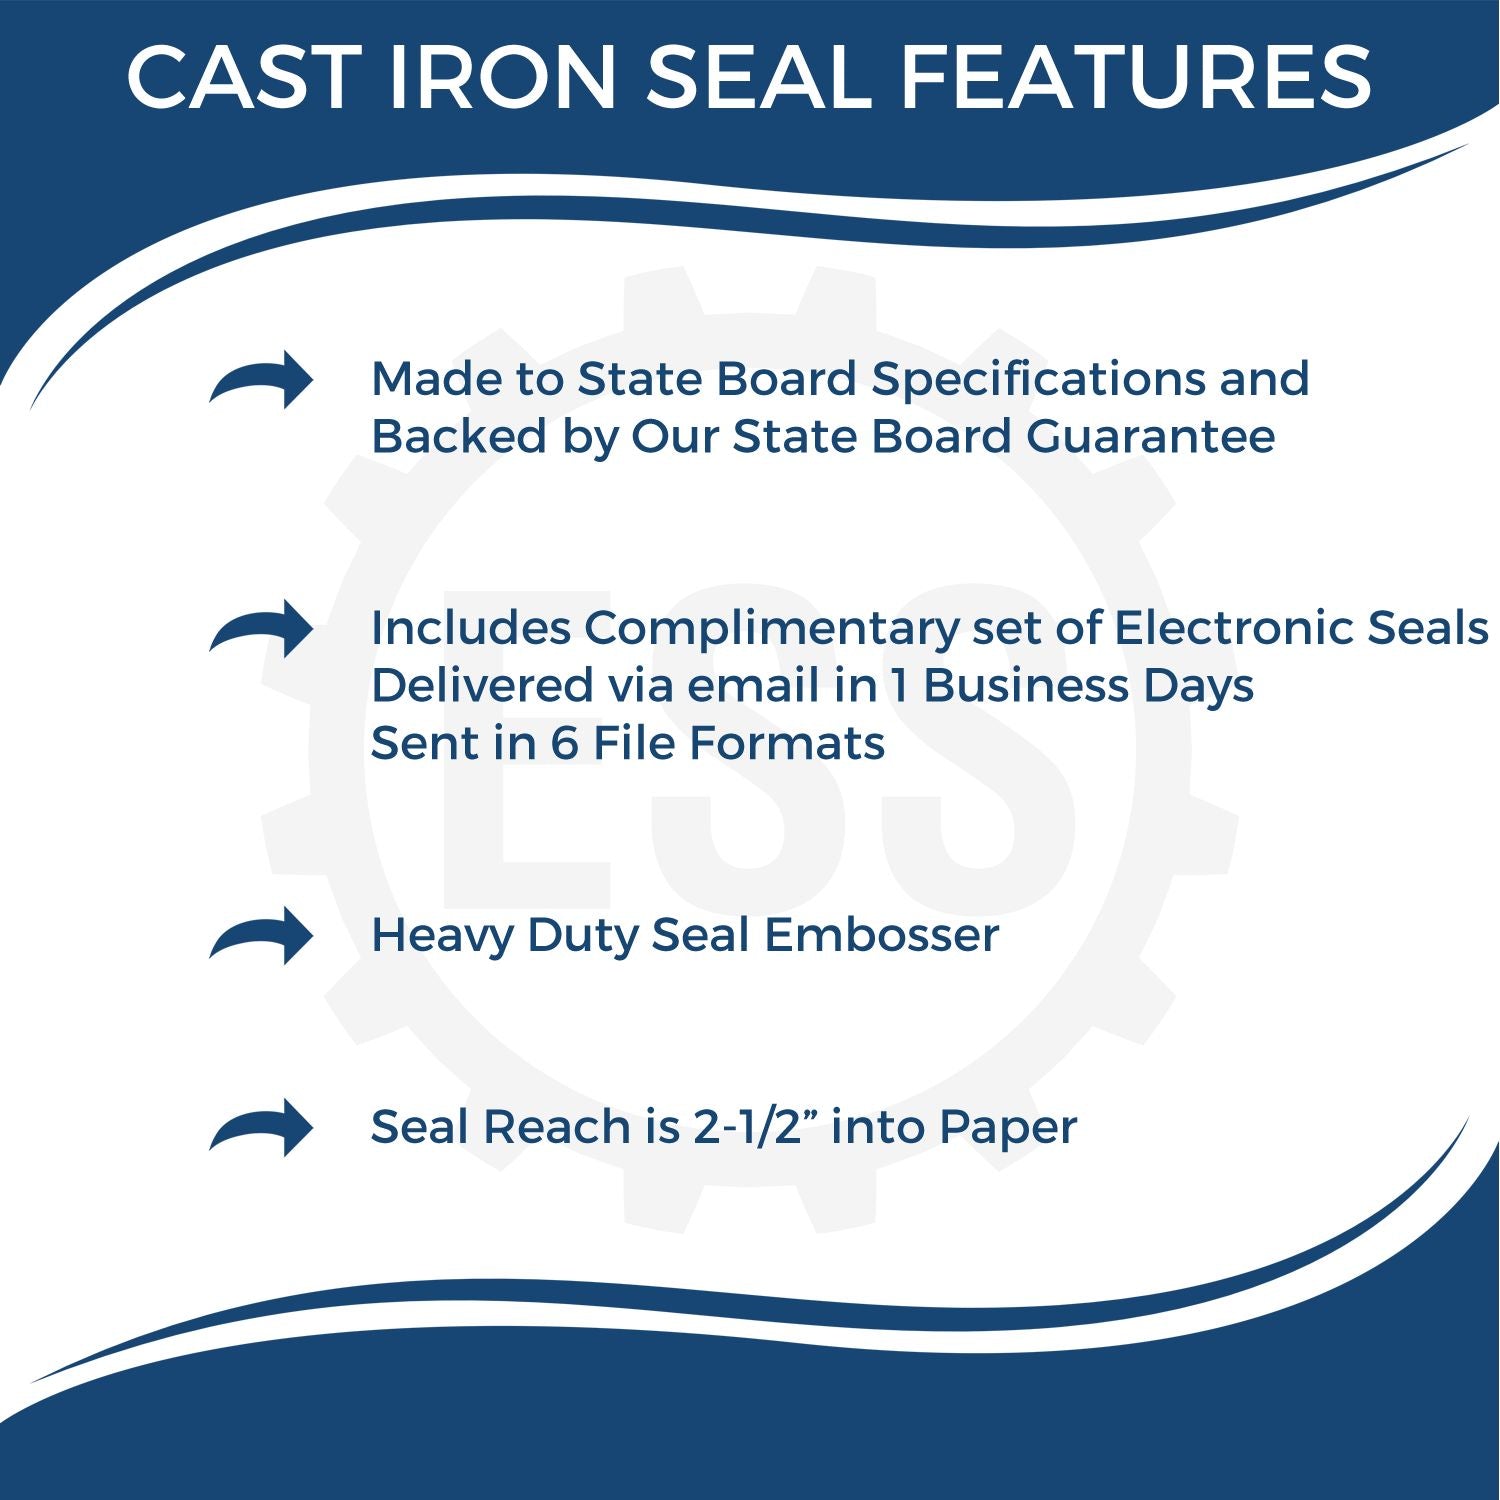 The main image for the Heavy Duty Cast Iron New Jersey Engineer Seal Embosser depicting a sample of the imprint and electronic files